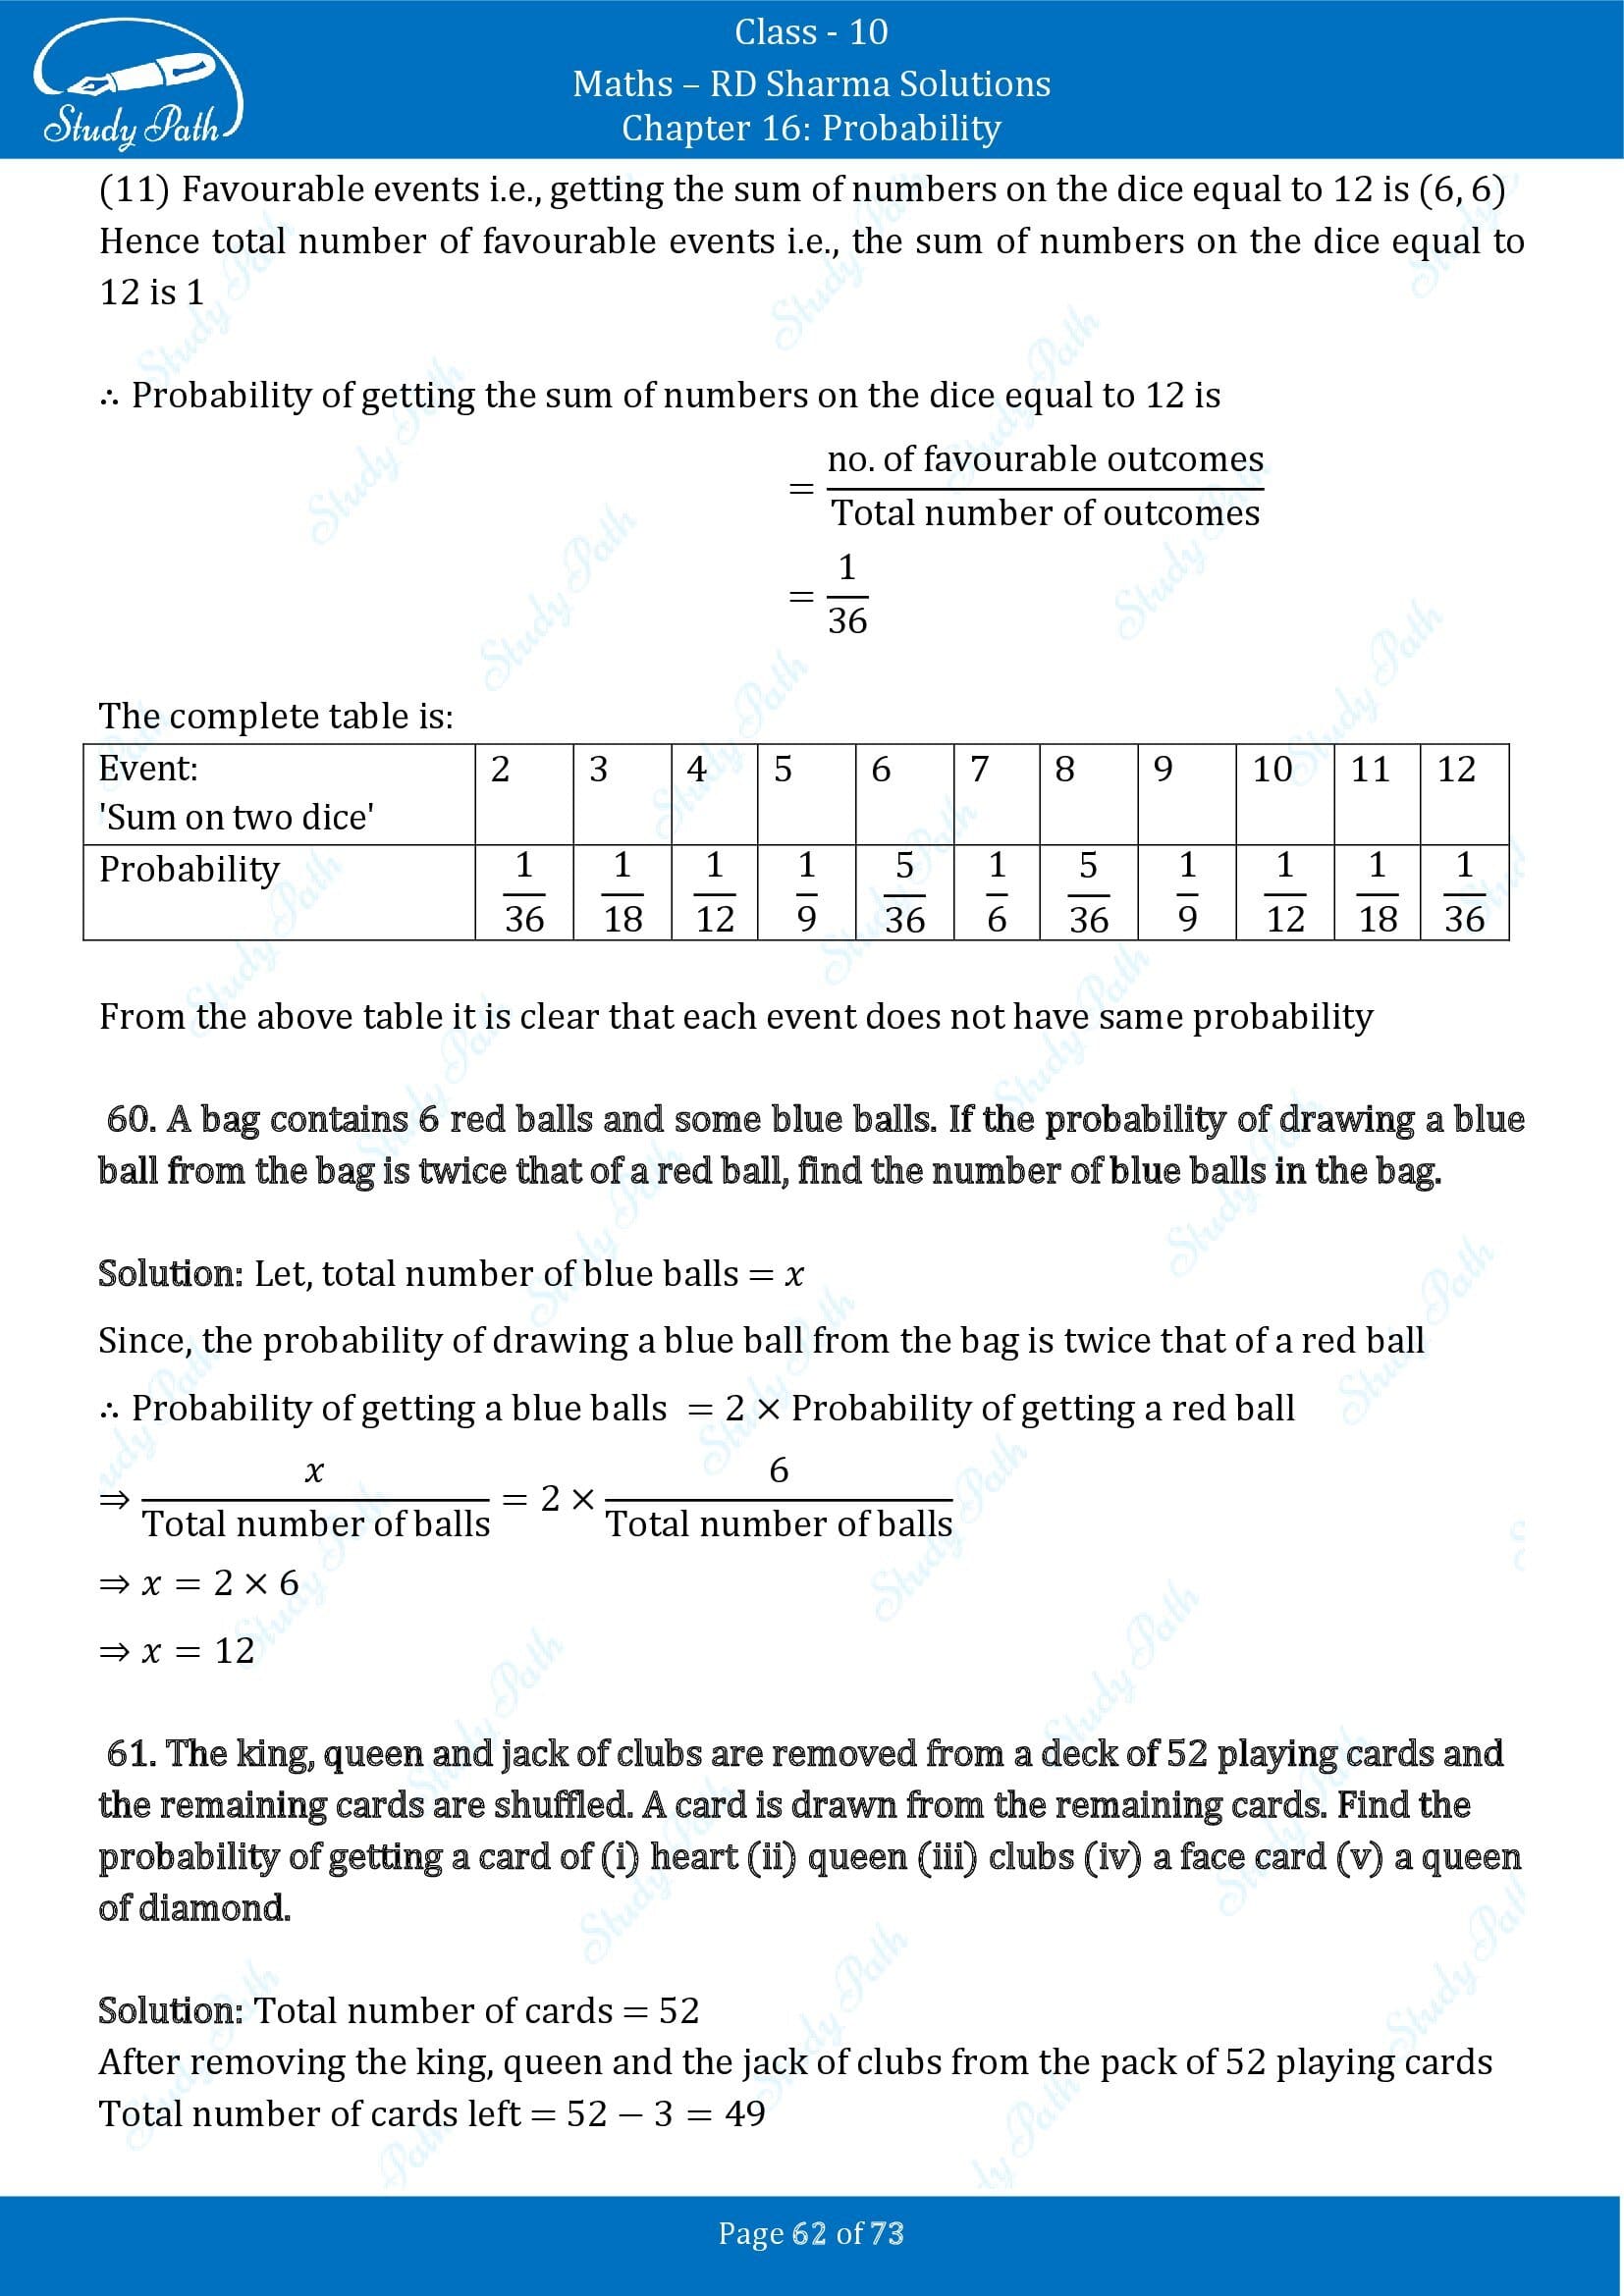 RD Sharma Solutions Class 10 Chapter 16 Probability Exercise 16.1 00062